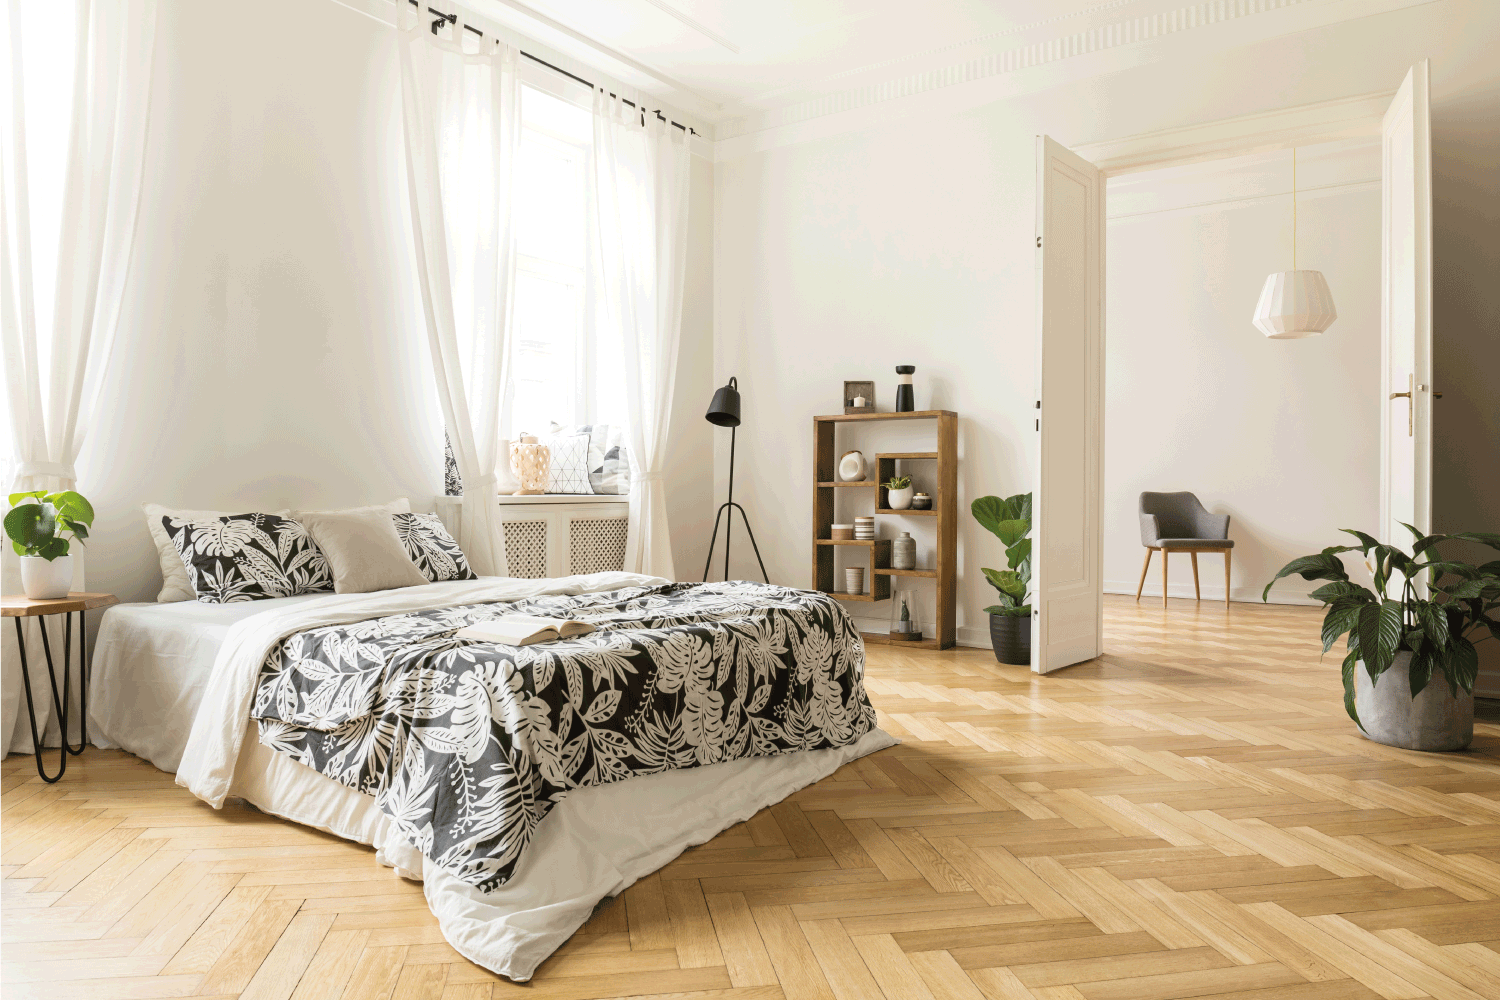 Stylish apartment interior with white walls and herringbone wooden floor. A view from a bedroom with a big bed to another room with an armchair